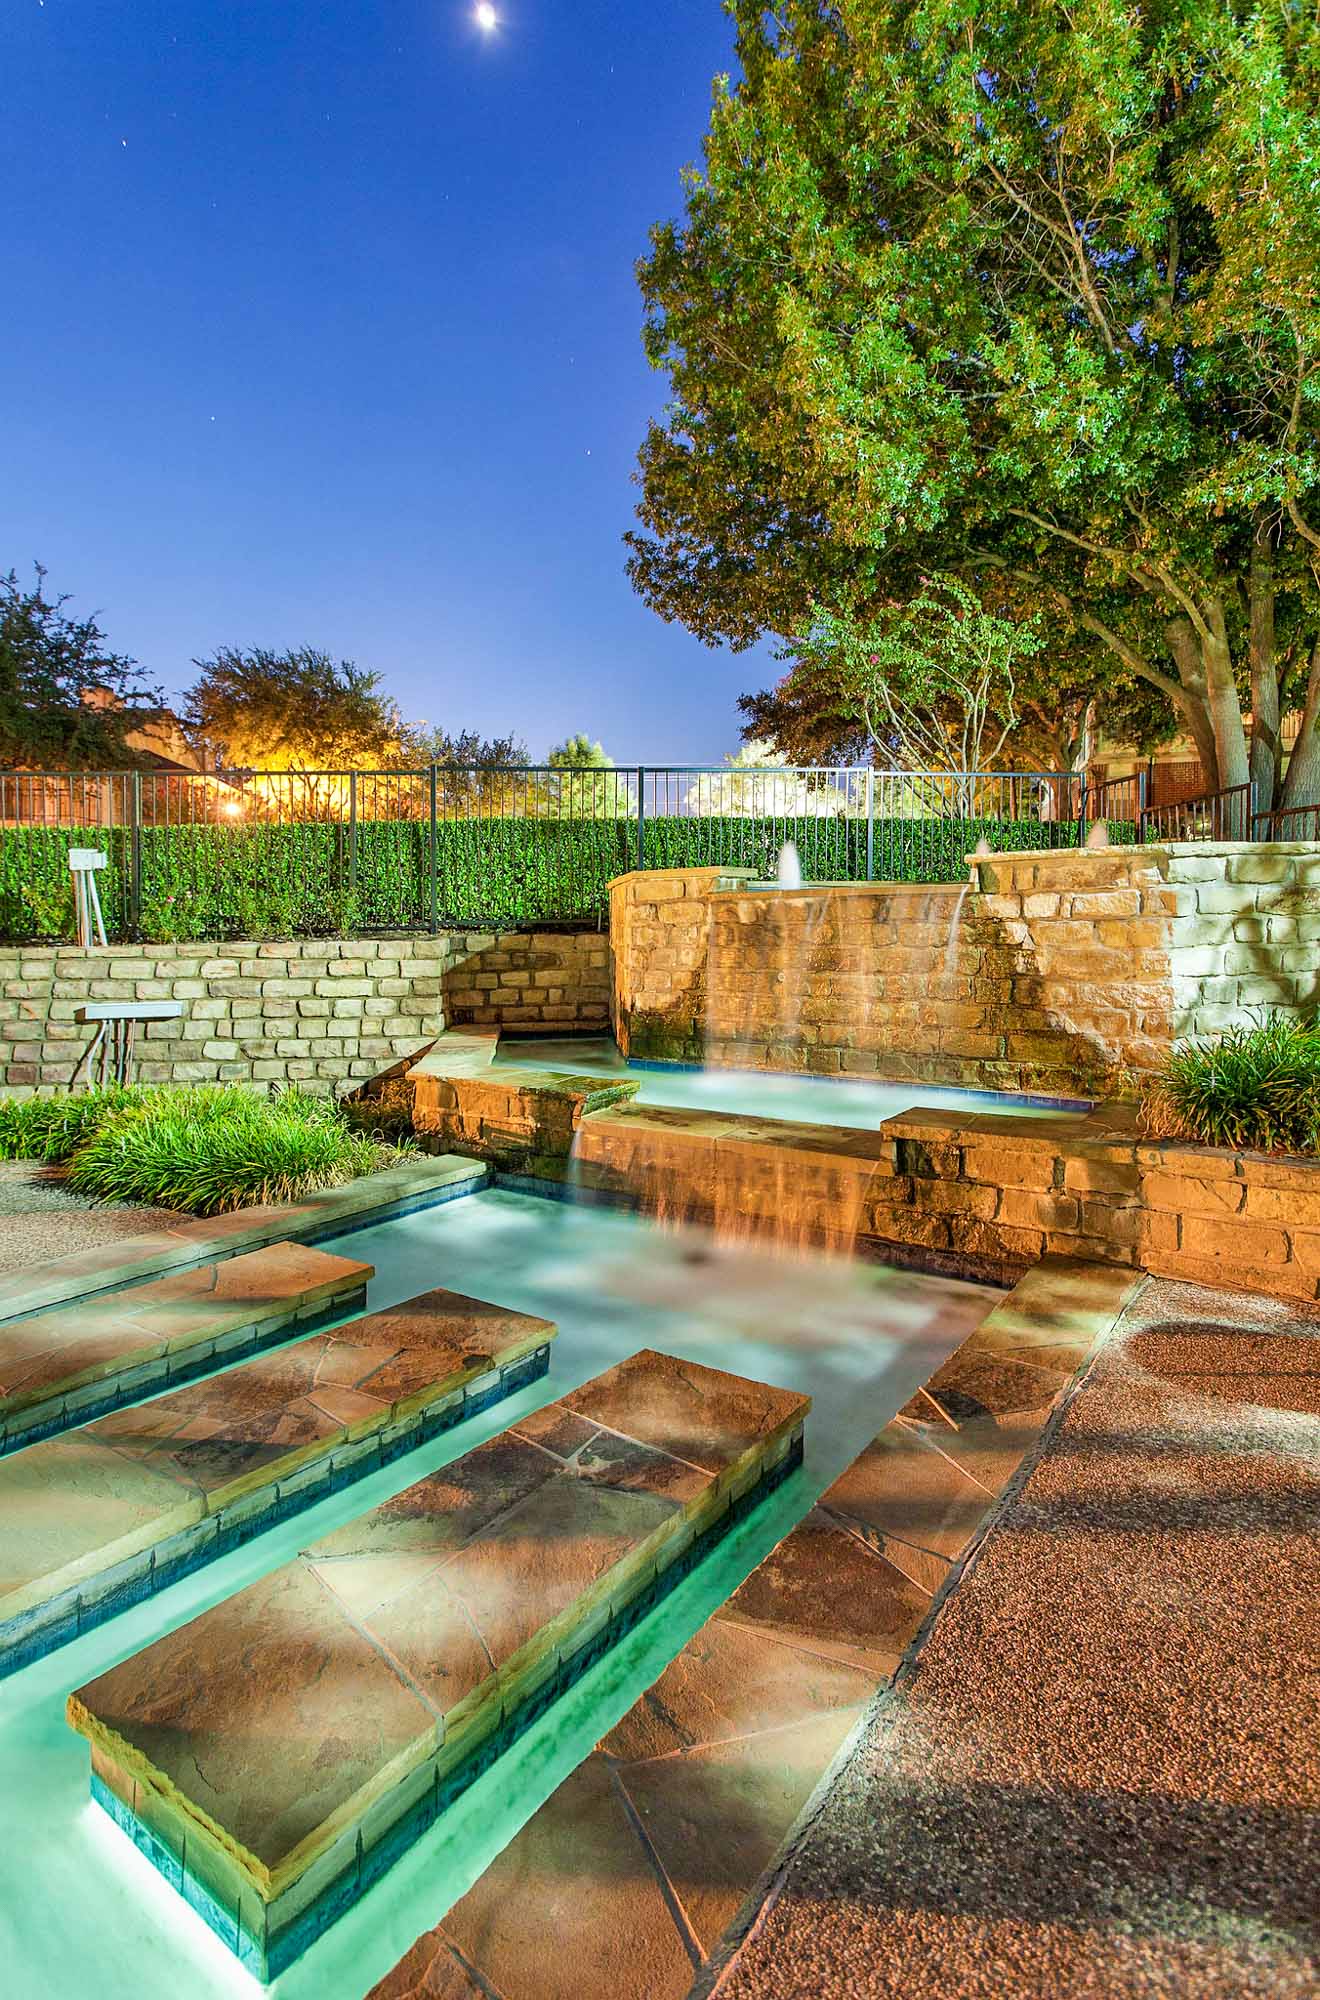 The hot tub at The Gables of McKinney apartments near Dallas, Texas.